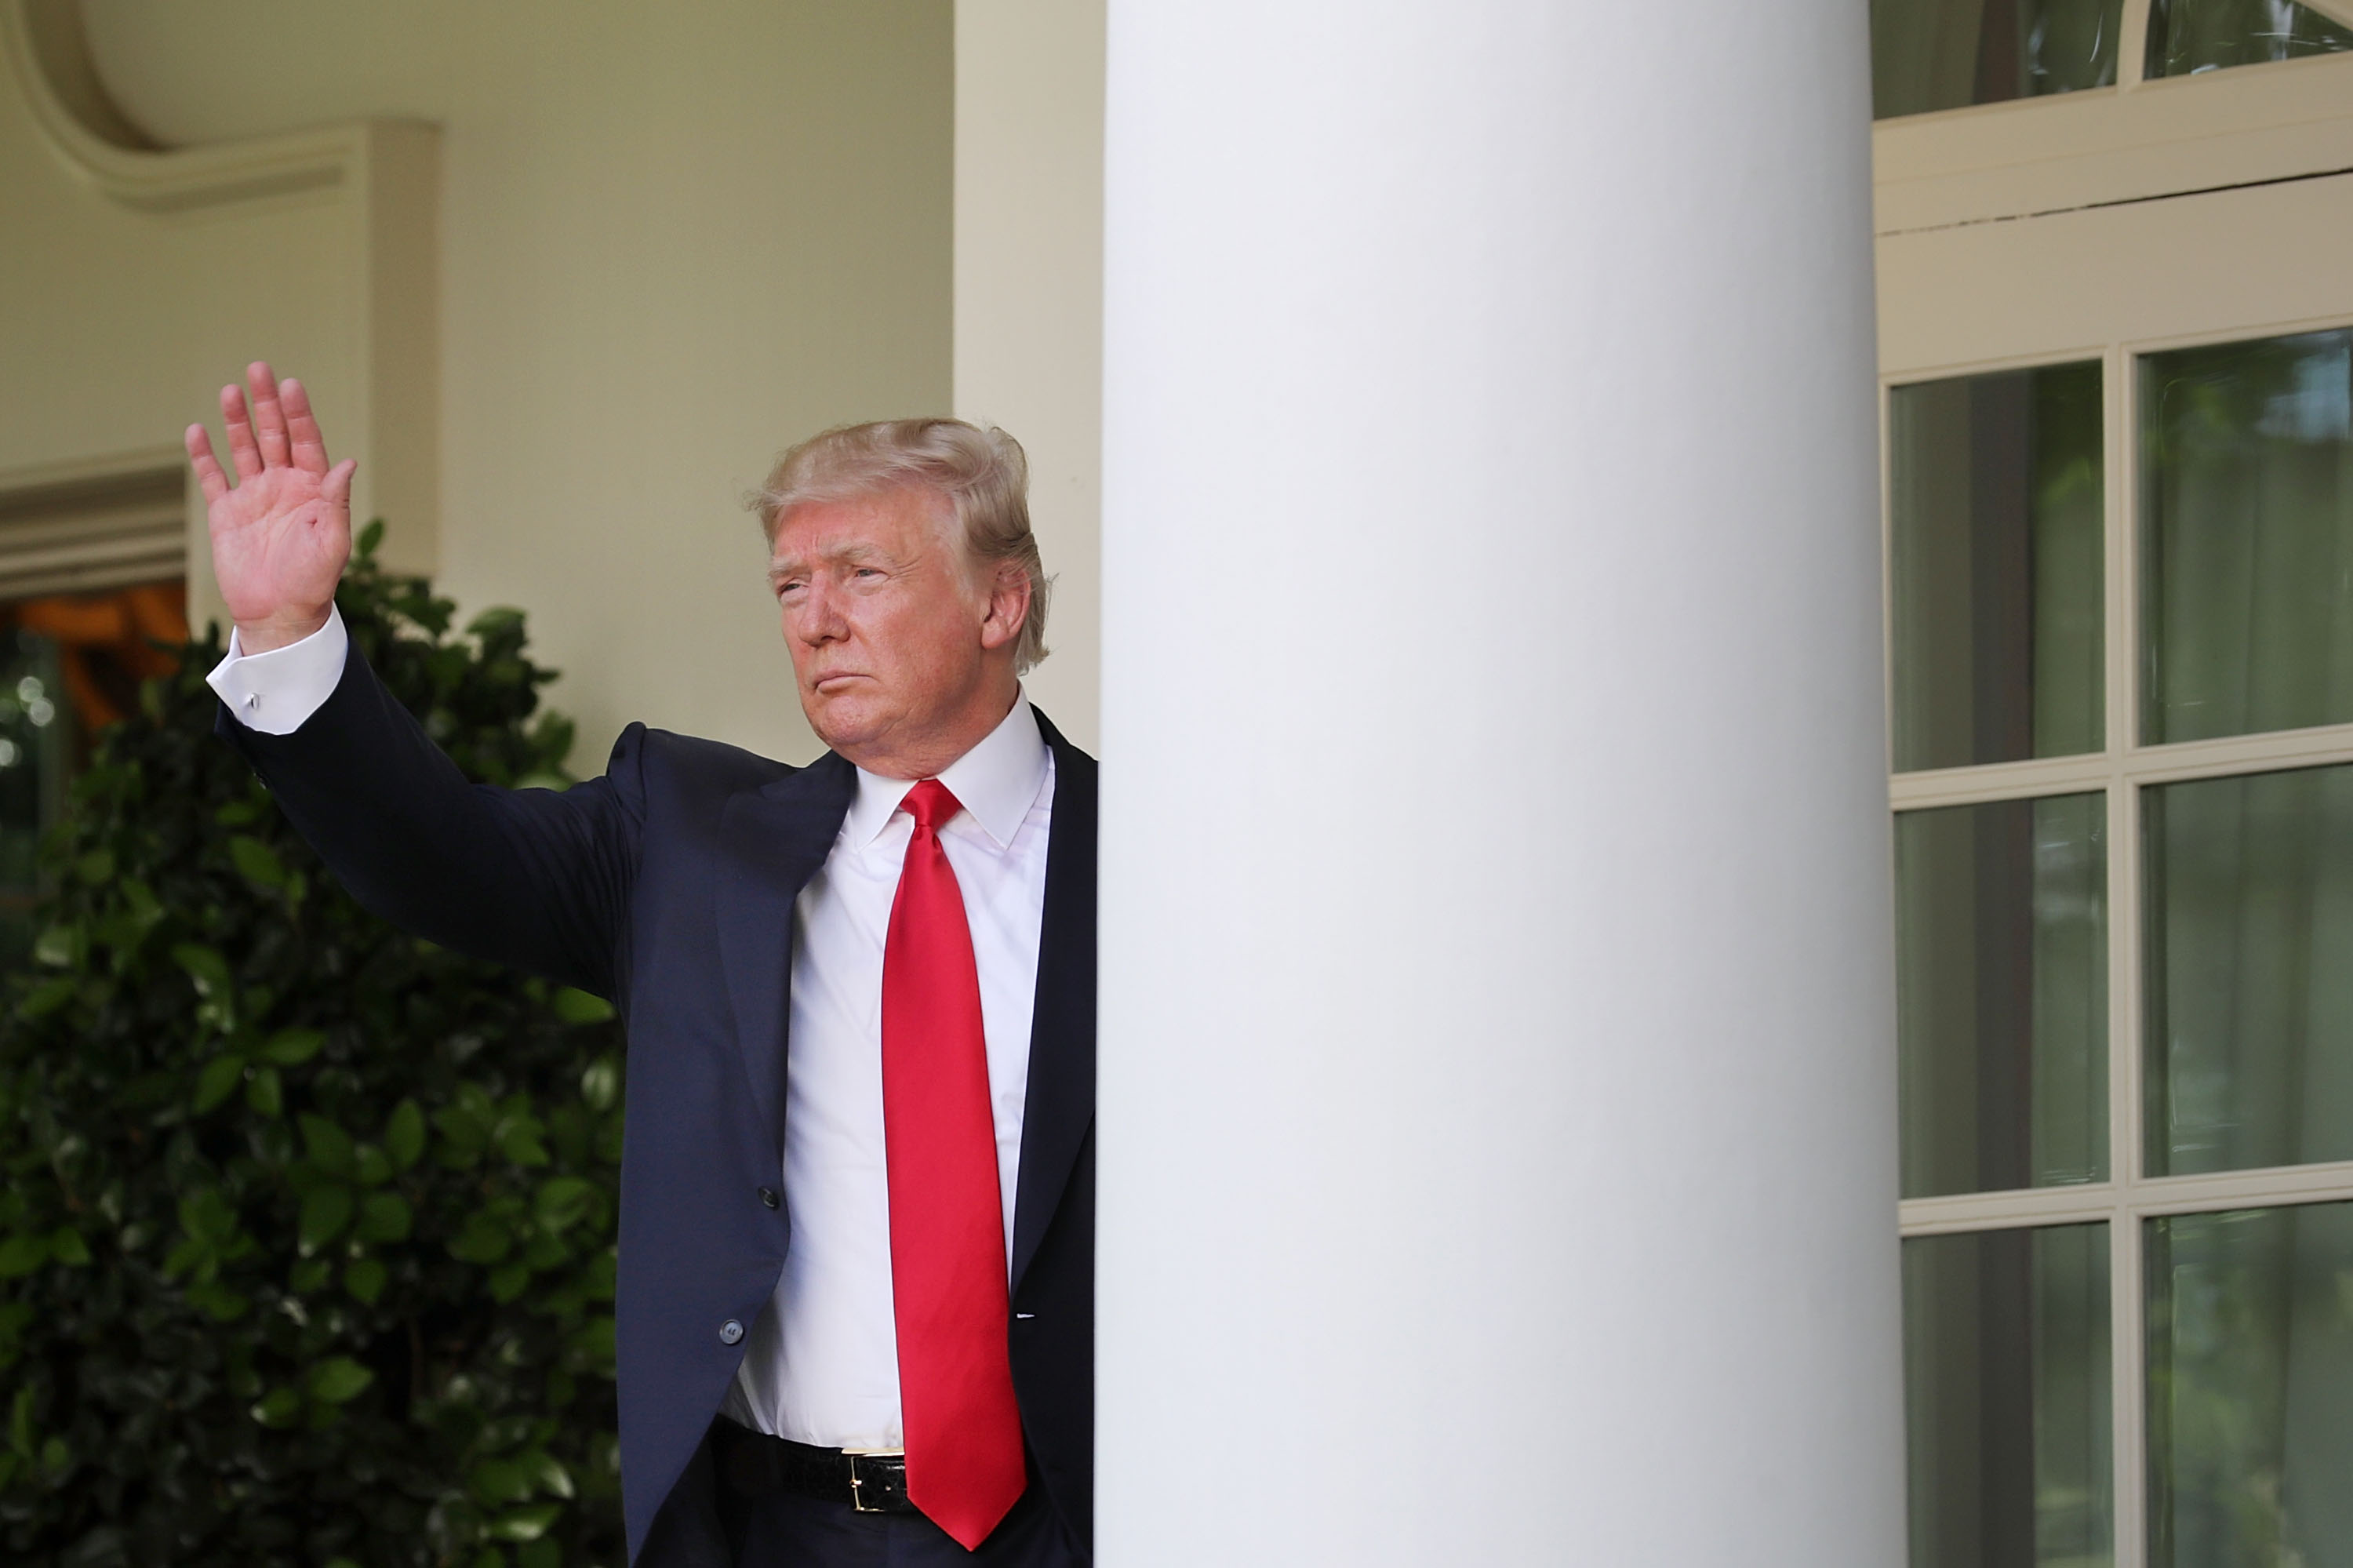 President Donald Trump waves goodbye after announcing his decision to pull the United States out of the Paris climate agreement in the Rose Garden at the White House June 1, 2017 in Washington, D.C. (Chip Somodevilla&mdash;Getty Images)